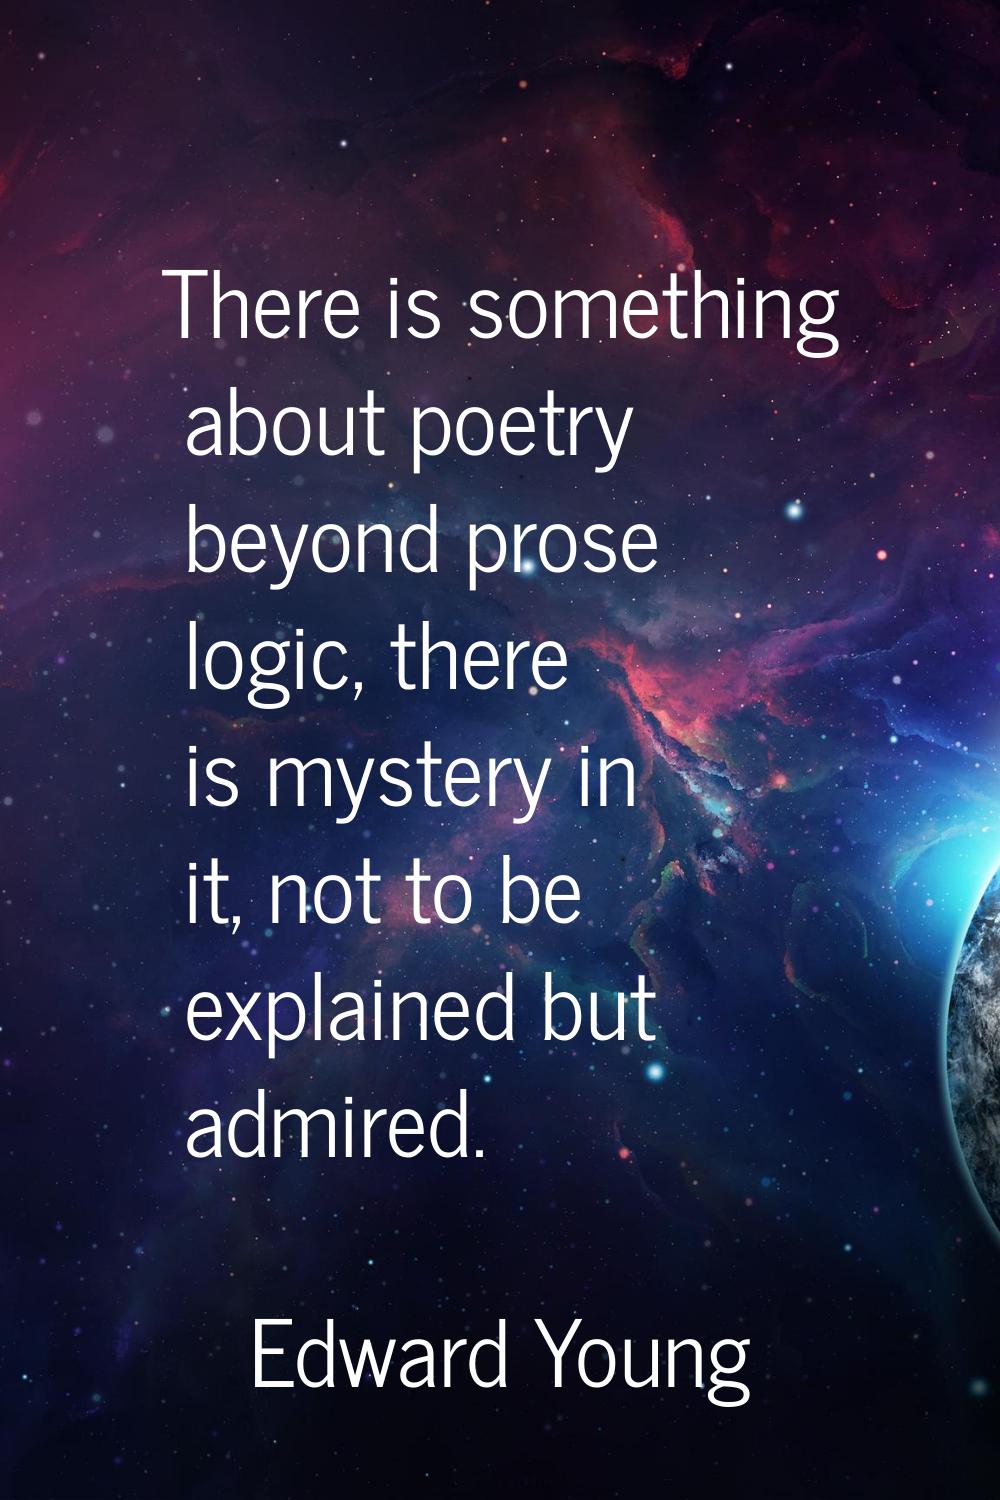 There is something about poetry beyond prose logic, there is mystery in it, not to be explained but